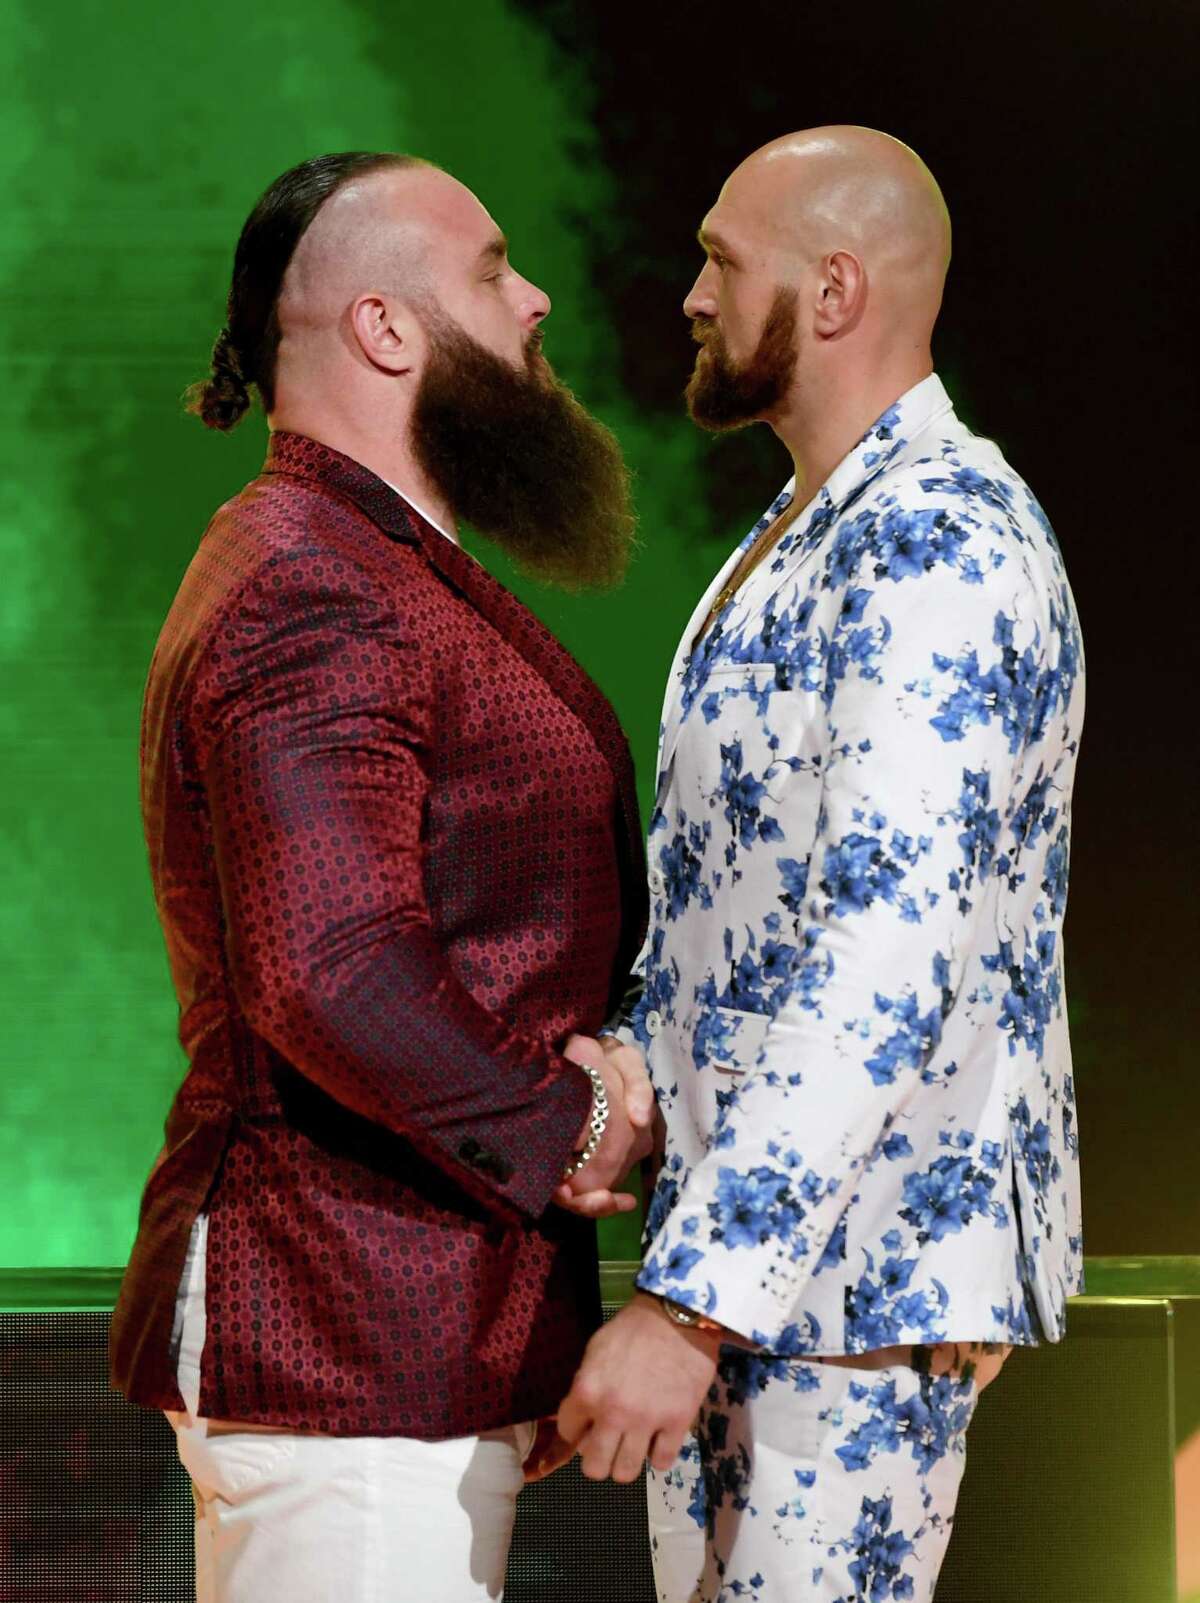 WWE Superstar Braun Strowman, left, and lineal heavyweight boxing champion Tyson Fury face off during the announcement of their match at a WWE news conference at T-Mobile Arena on Oct. 11, 2019 in Las Vegas, Nev. Strowman will face Fury and WWE champion Brock Lesnar will take on former UFC heavyweight champion Cain Velasquez at the WWE's Crown Jewel event at Fahd International Stadium in Riyadh, Saudi Arabia on Oct. 31, 2019.